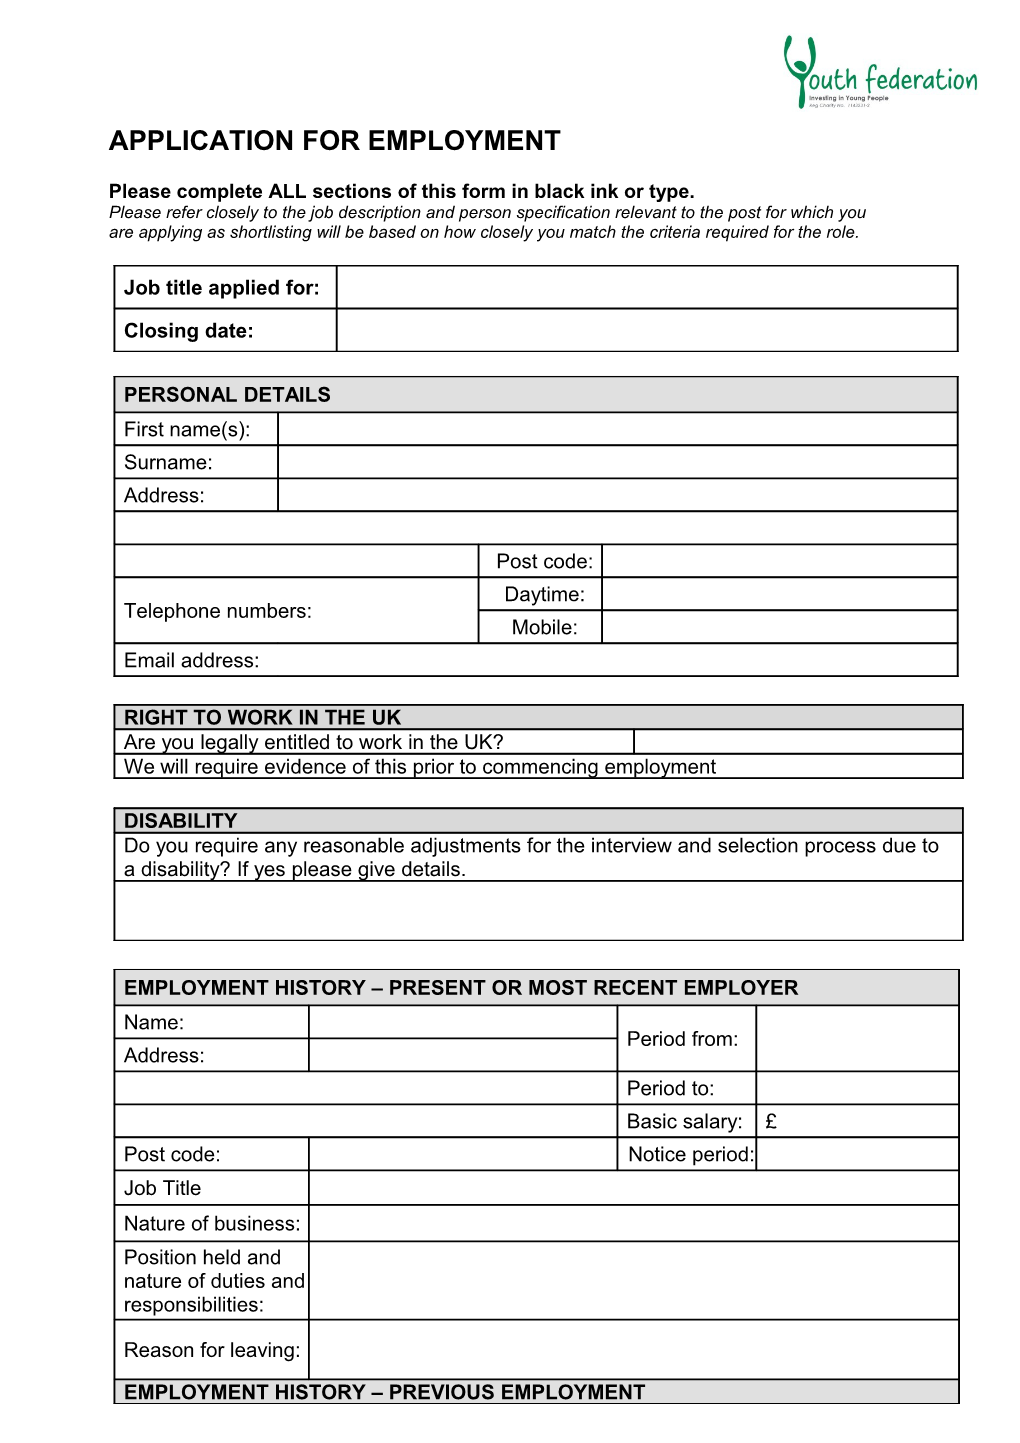 Please Complete ALL Sections of This Form in Black Ink Or Type